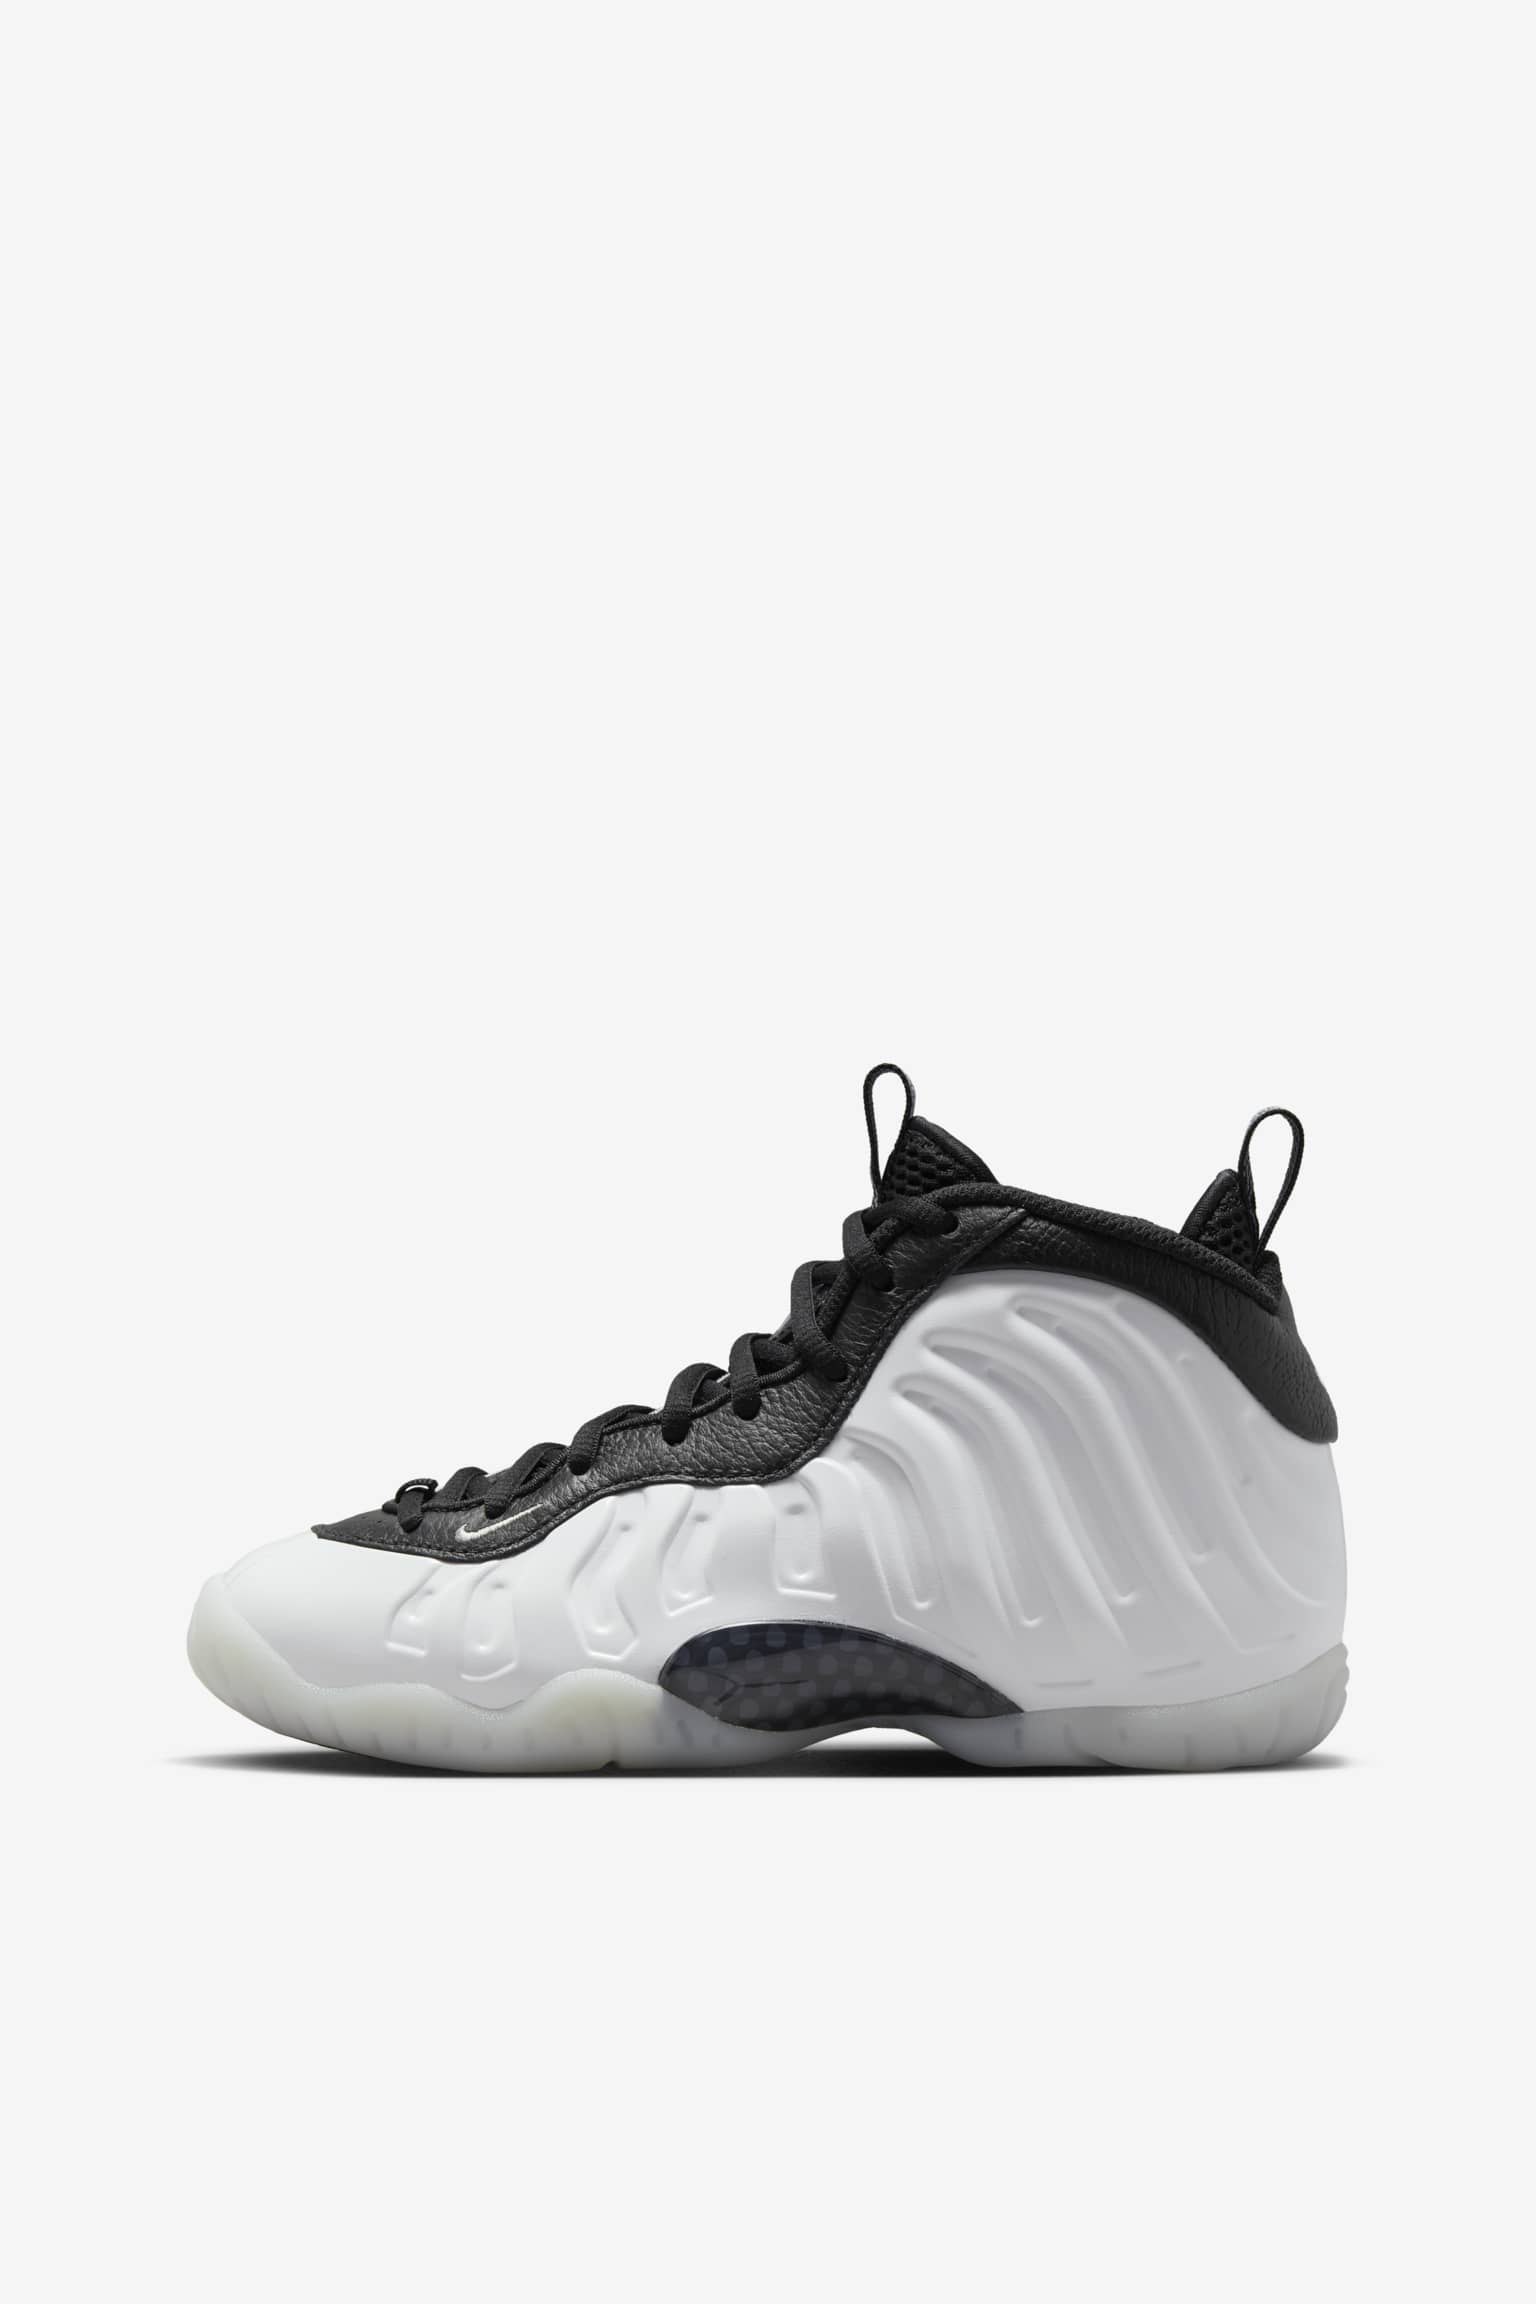 carrete Claire Europa Air Foamposite One 'White and Black' (DV0815-100) Release Date. Nike SNKRS